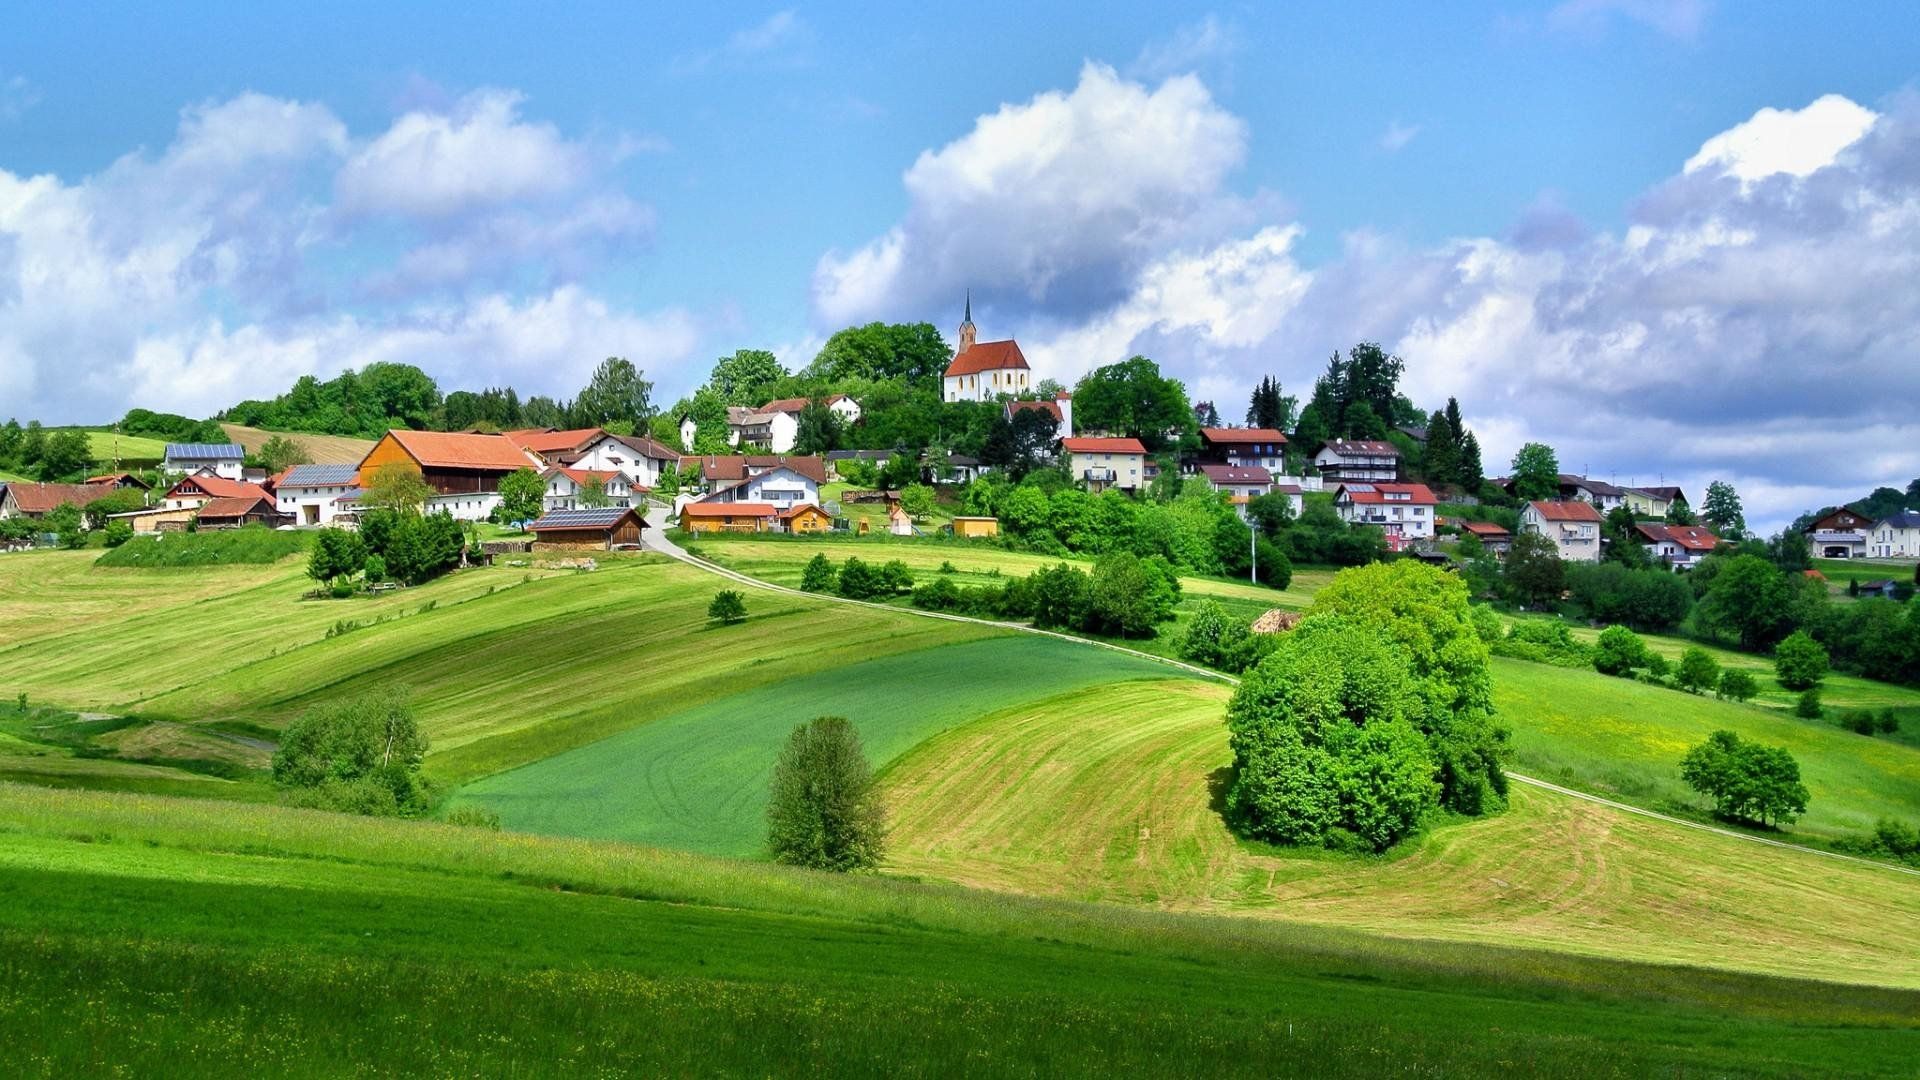 Village in the Countryside HD Wallpaper. Background Image